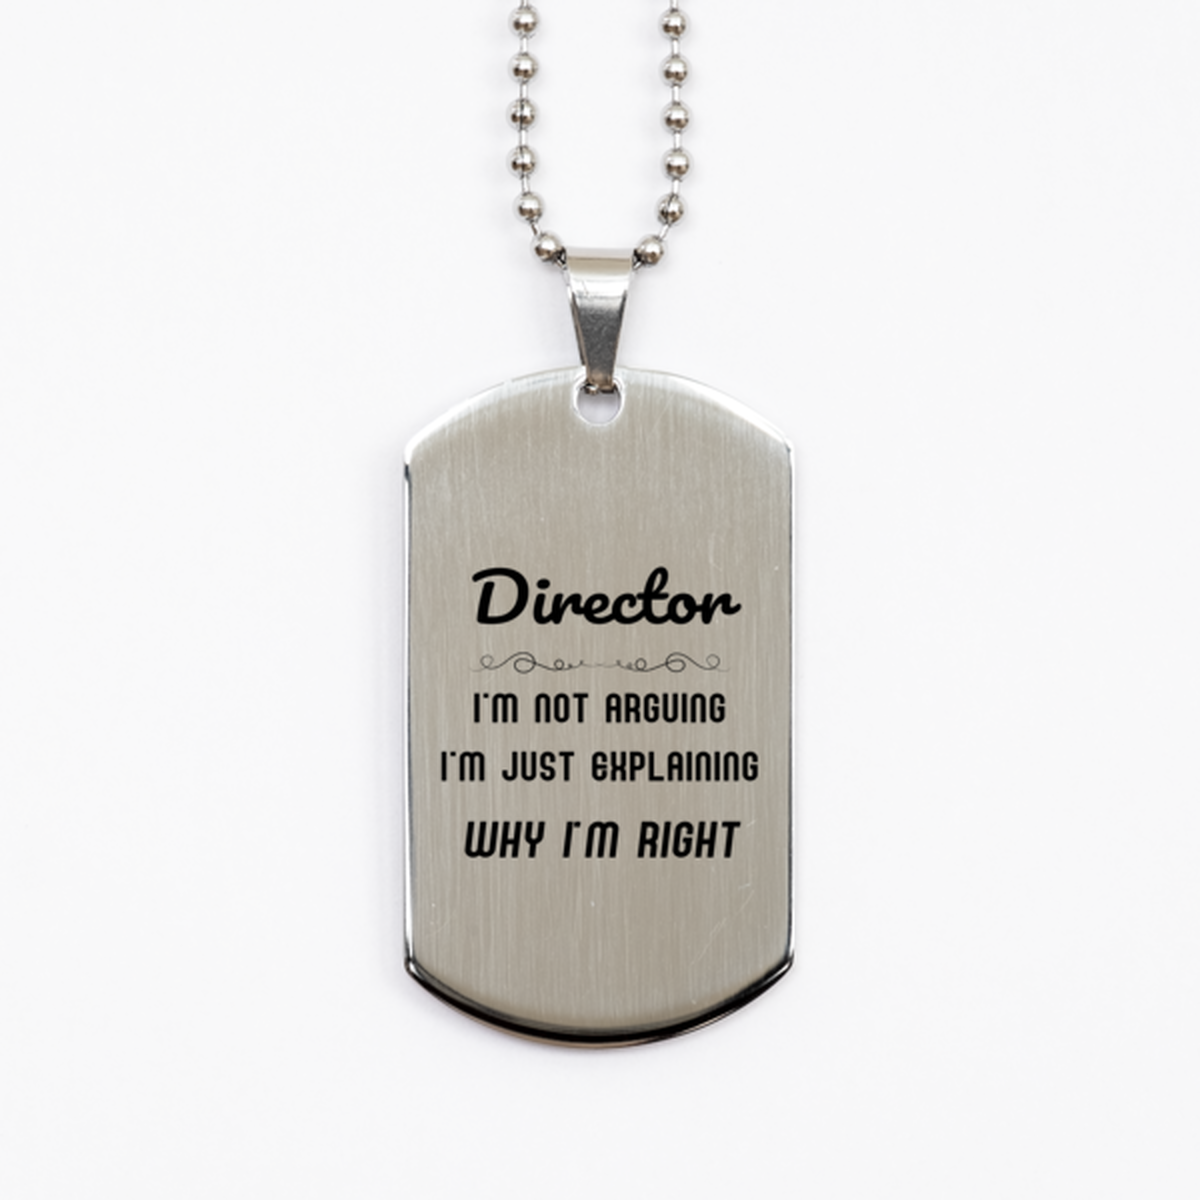 Director I'm not Arguing. I'm Just Explaining Why I'm RIGHT Silver Dog Tag, Funny Saying Quote Director Gifts For Director Graduation Birthday Christmas Gifts for Men Women Coworker